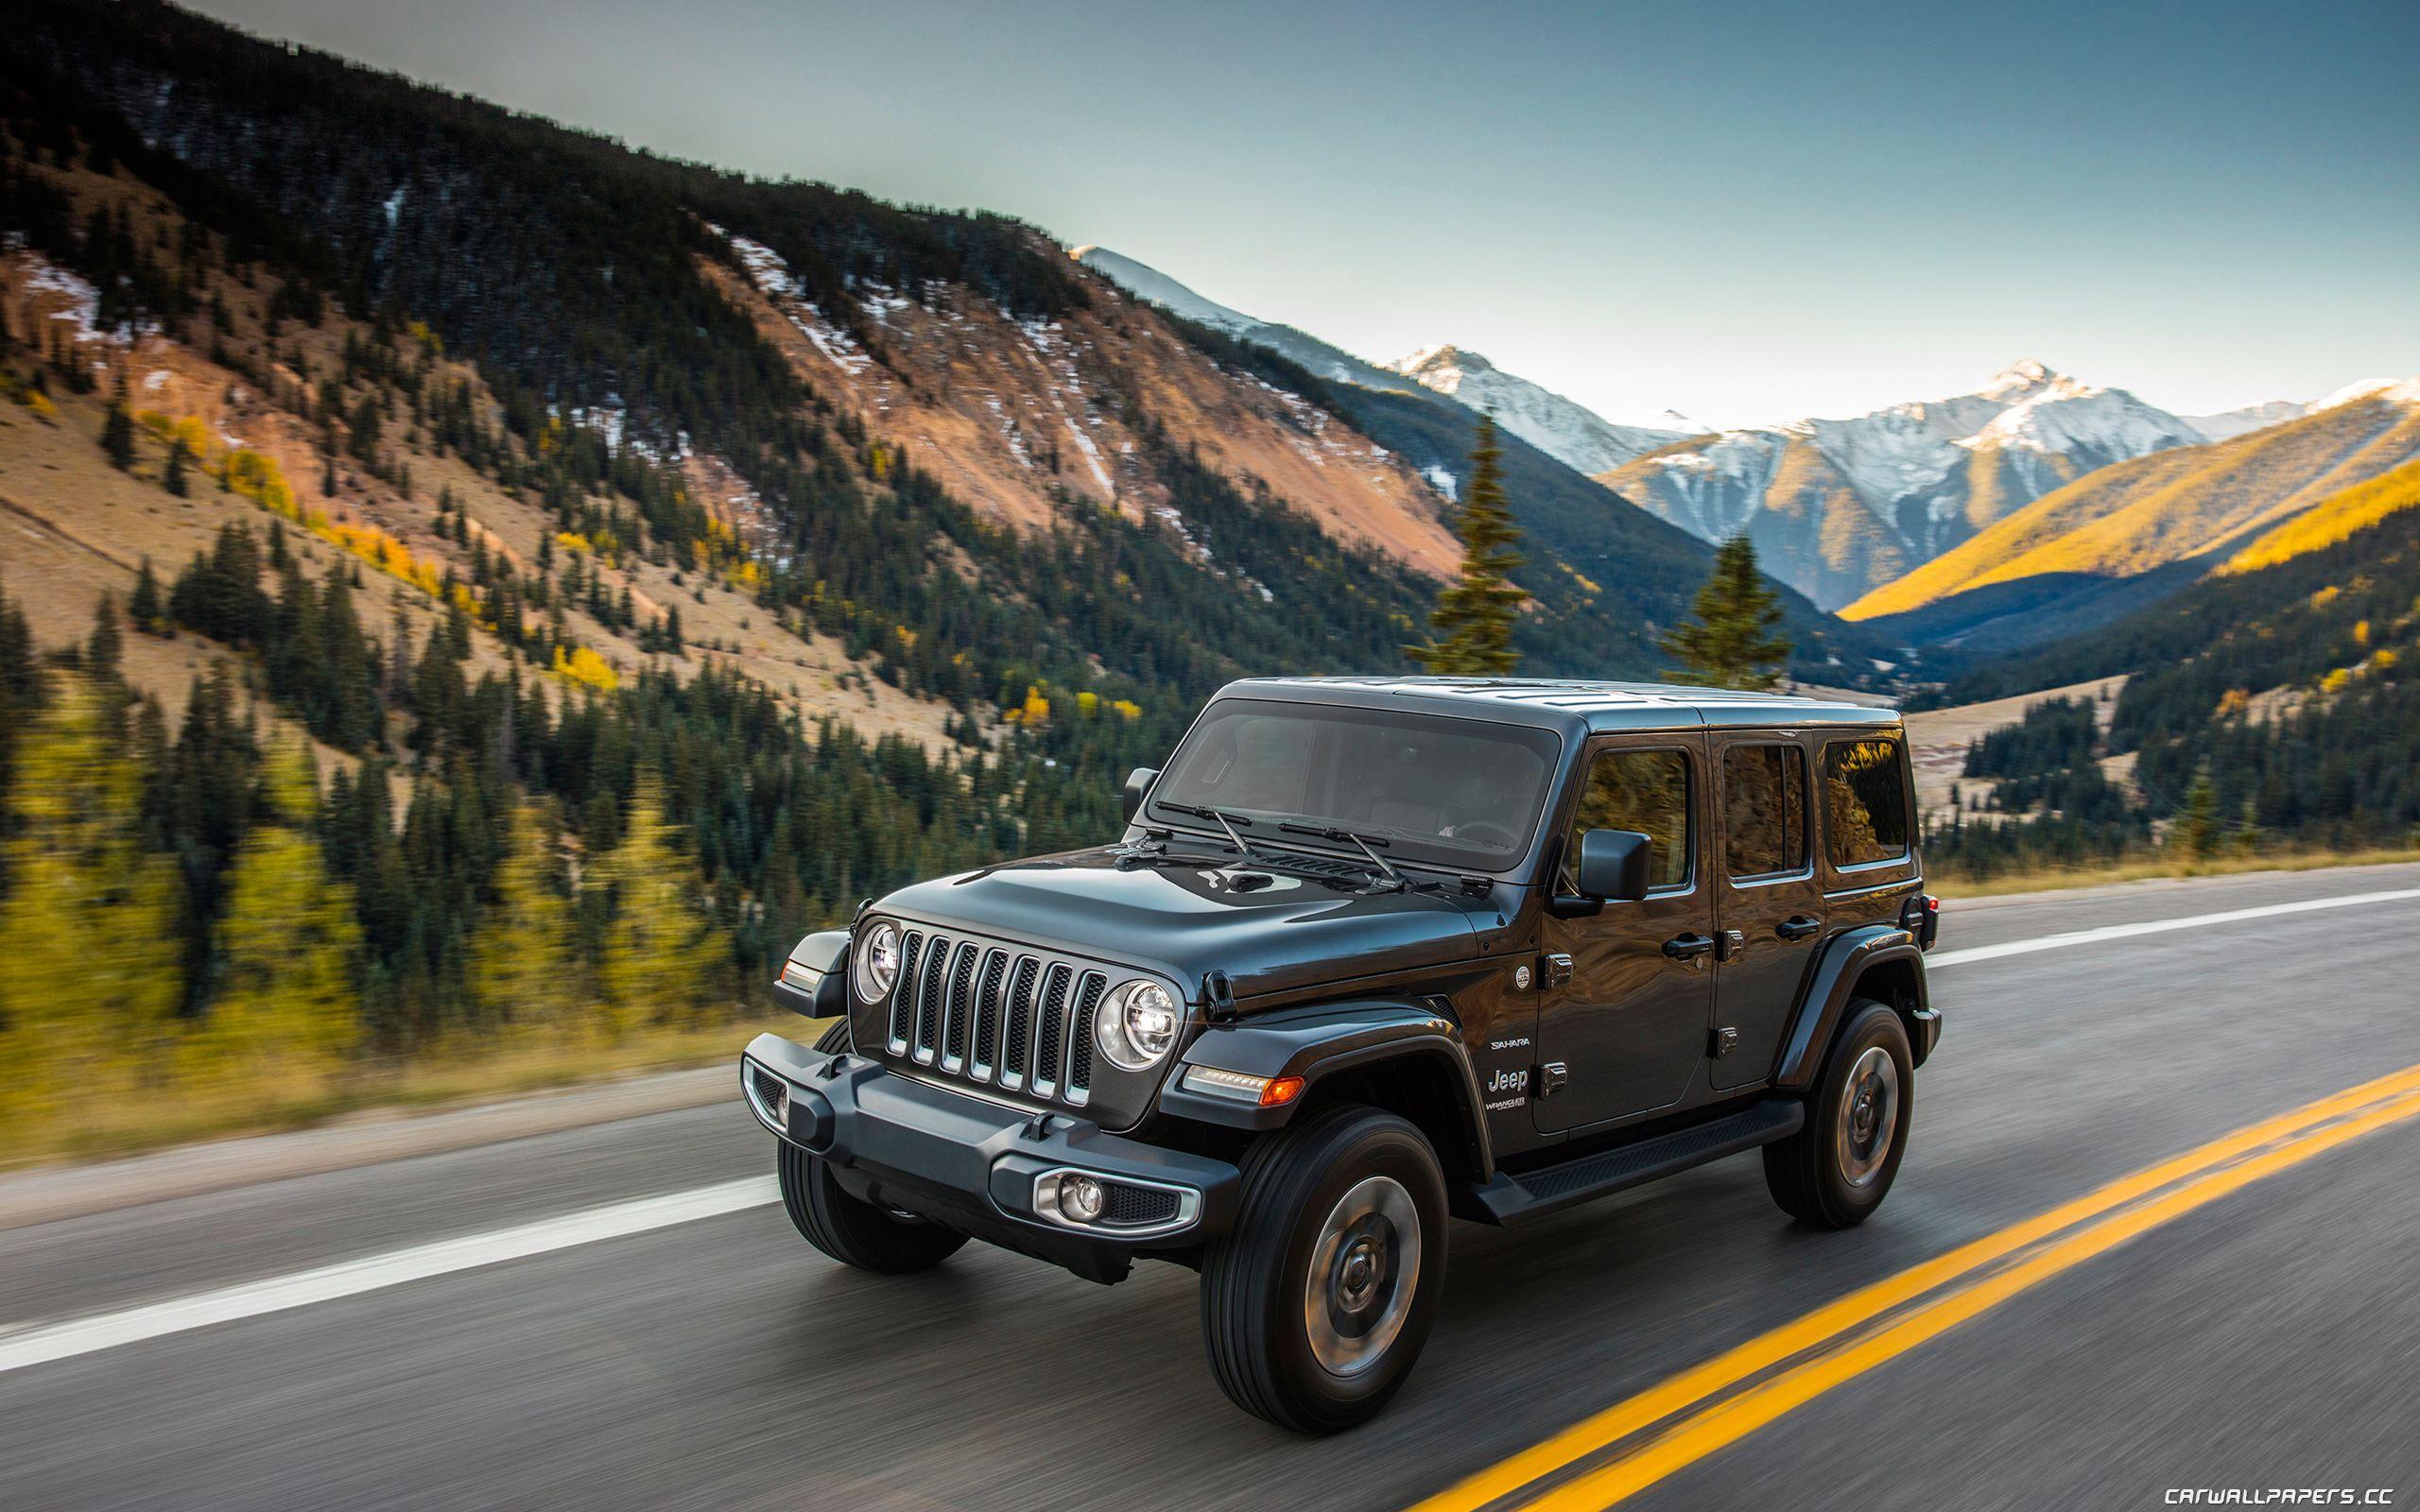 [ Jeep Wrangler Unlimited 2018 ]. The 2018 Jeep Wrangler Jl Is